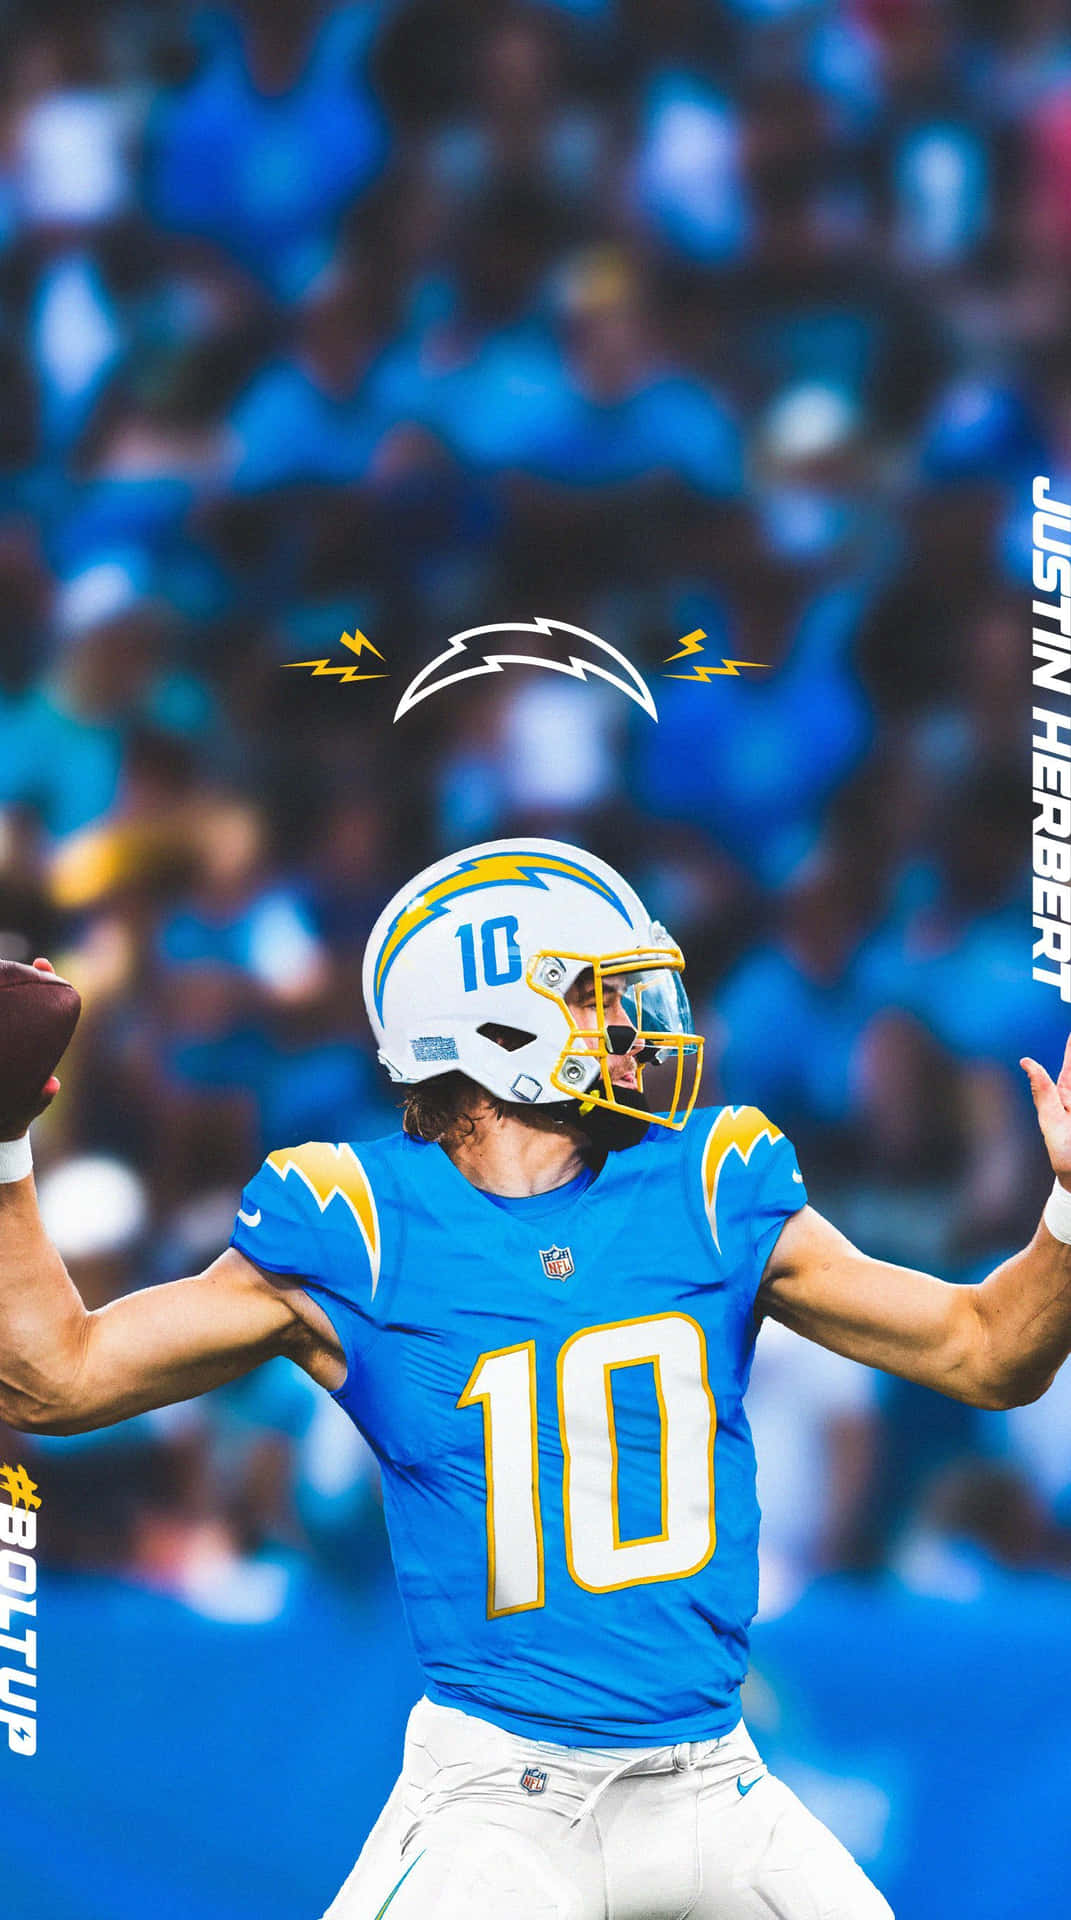 Losgeht's, Chargers! Wallpaper